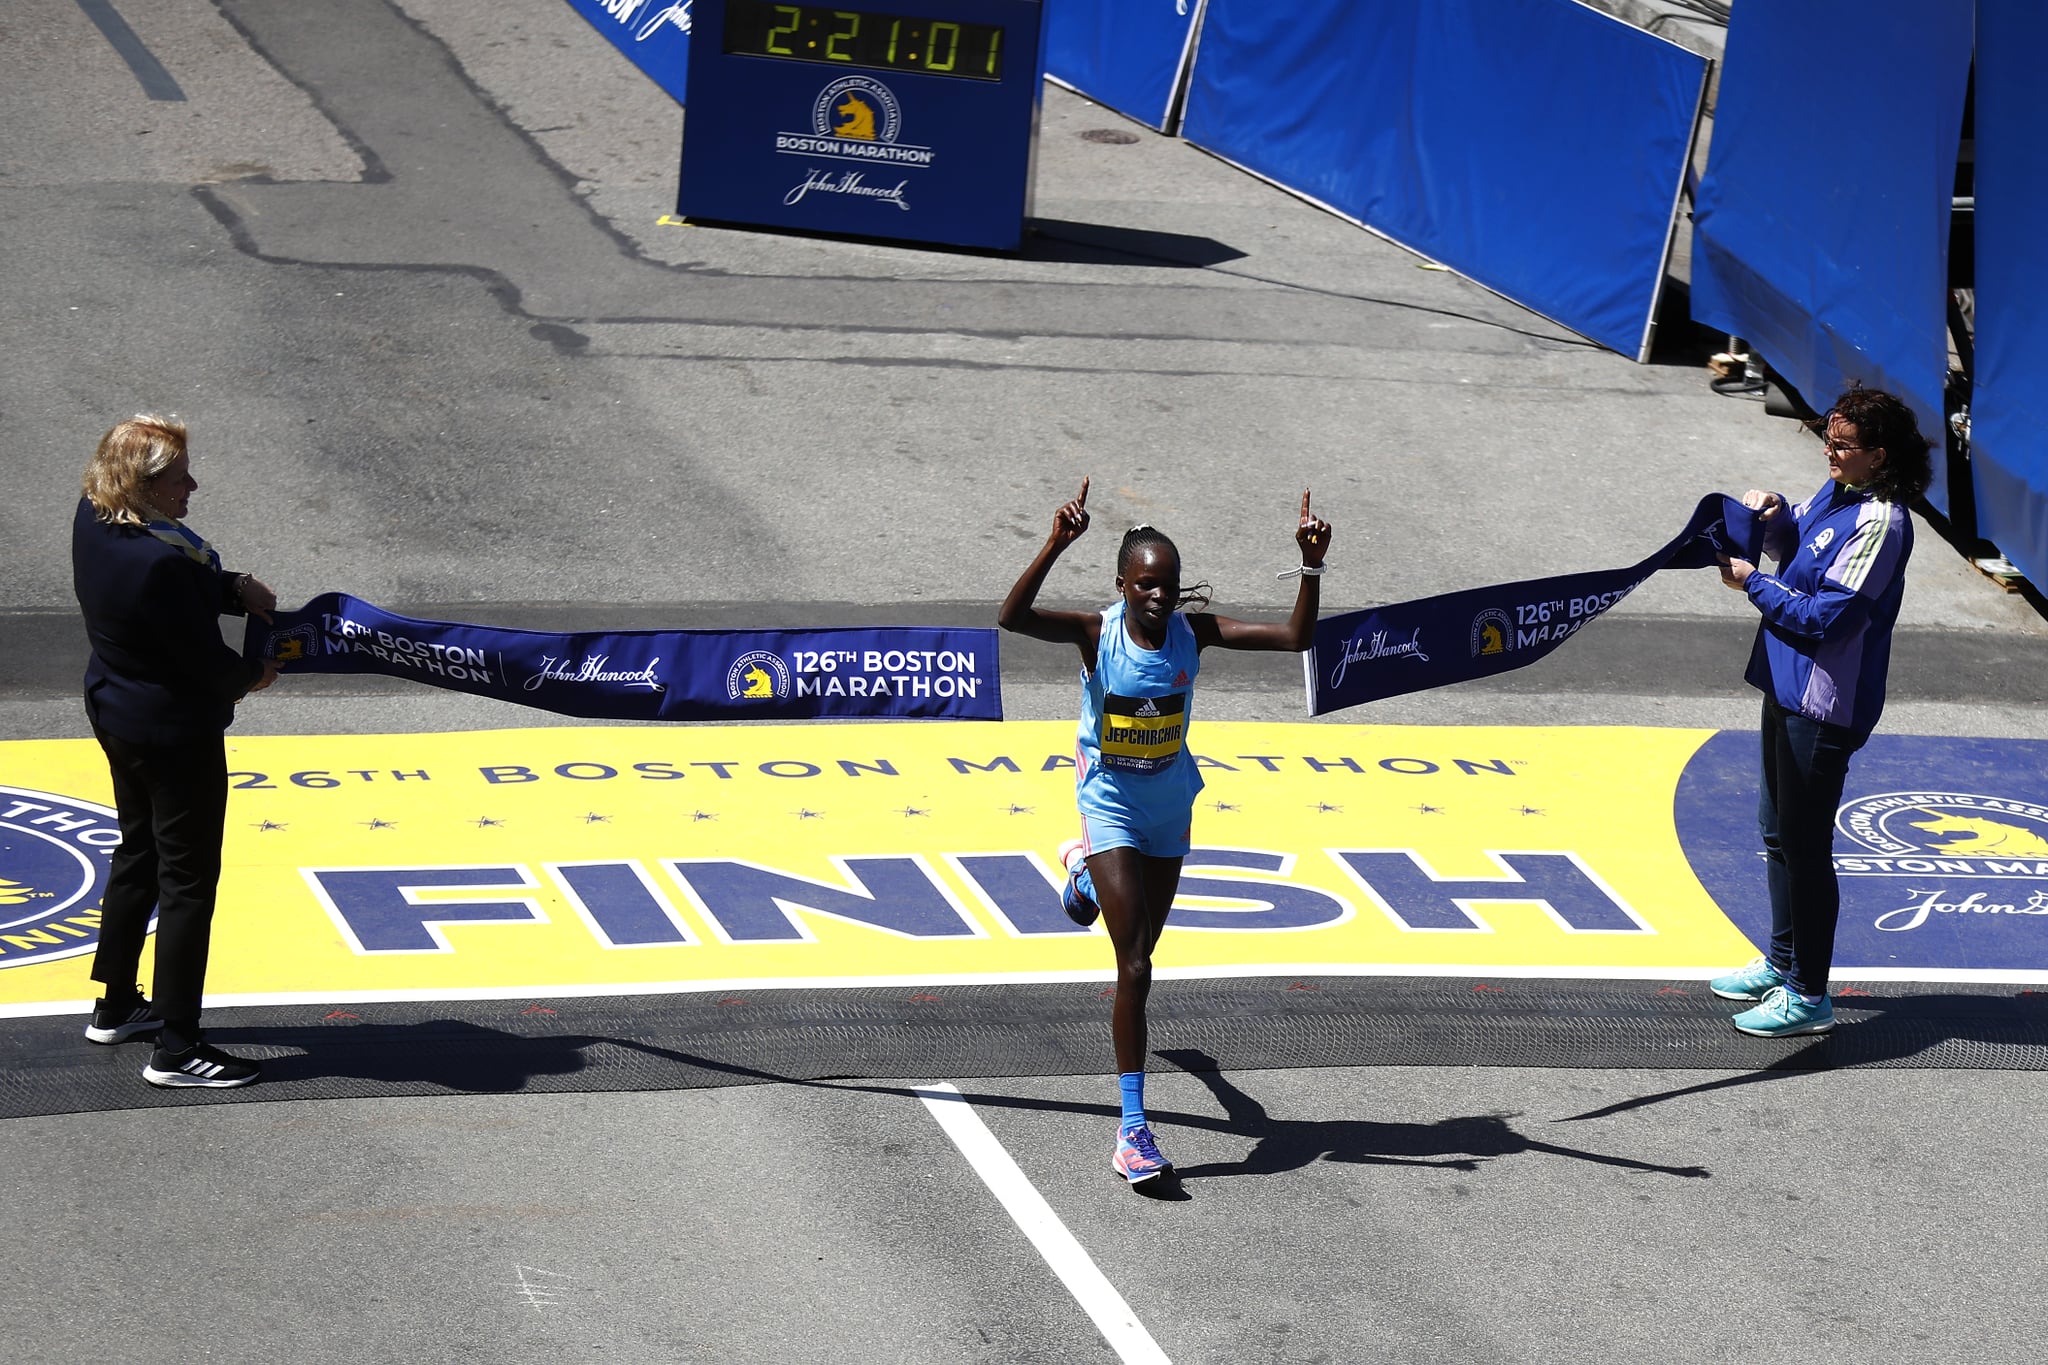 BOSTON, MASSACHUSETTS - APRIL 18: Peres Jepchirchir of Kenya crosses the finish line to take first place in the professional women's division during the 126th Boston Marathon on April 18, 2022 in Boston, Massachusetts. (Photo by Omar Rawlings/Getty Images)